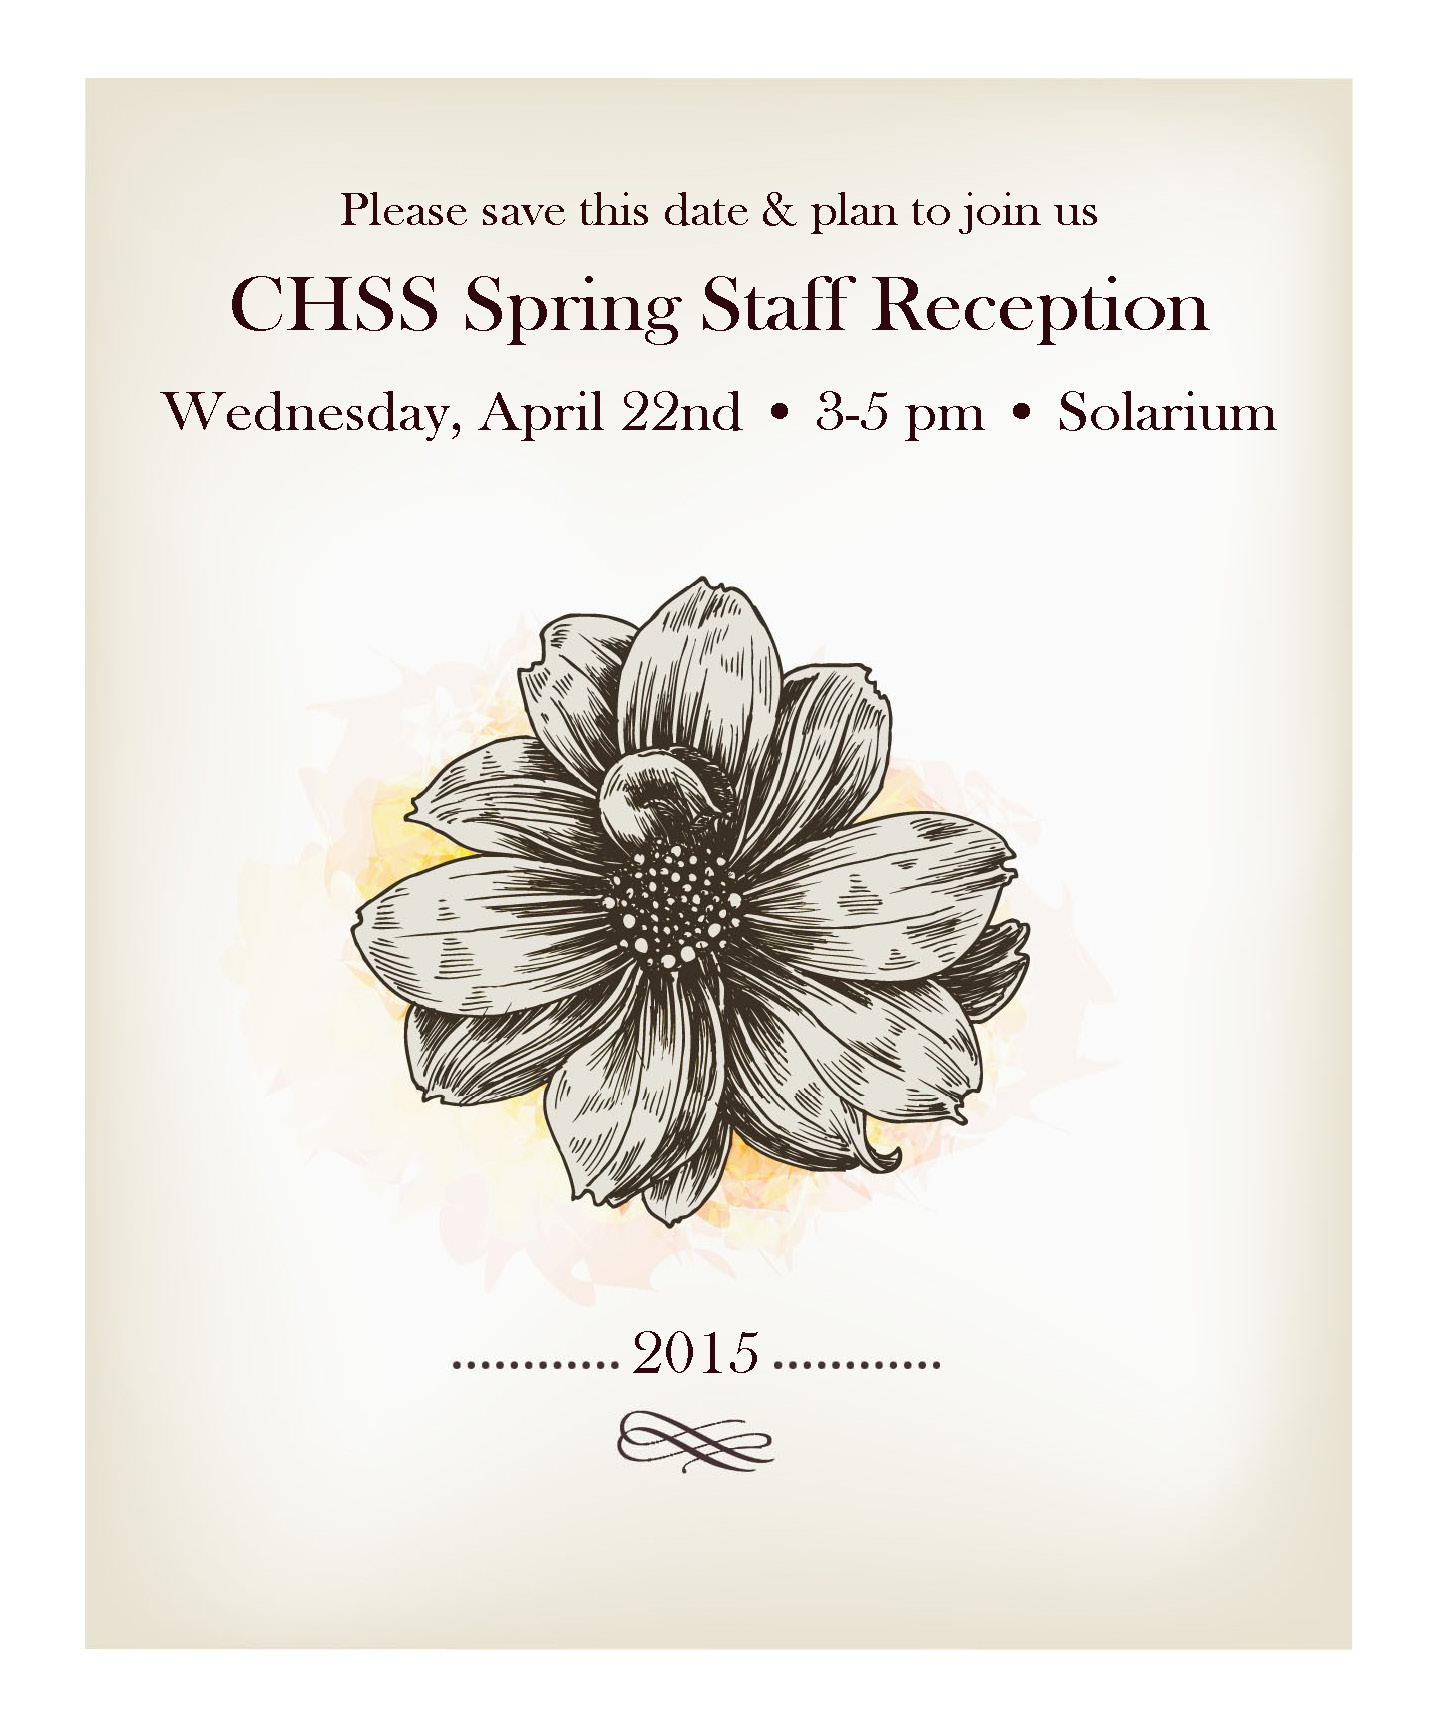 Spring Staff Reception Save the Date.jpg